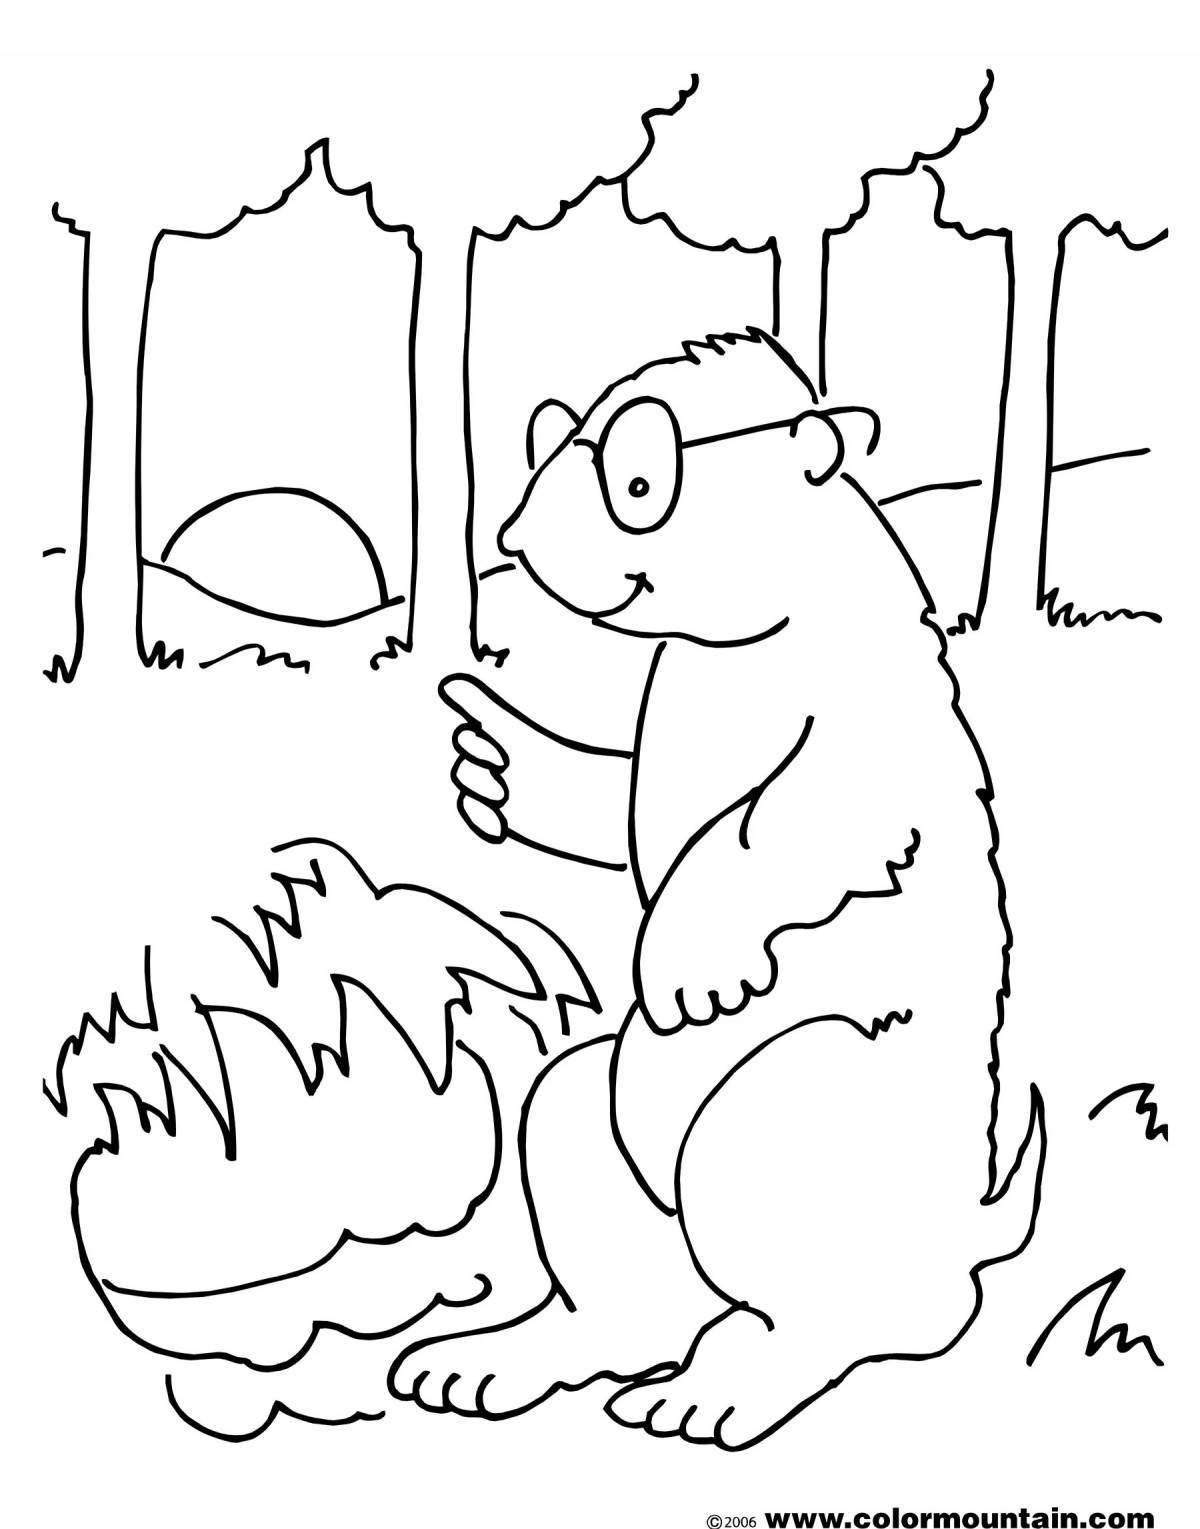 Coloring book cheerful marmot